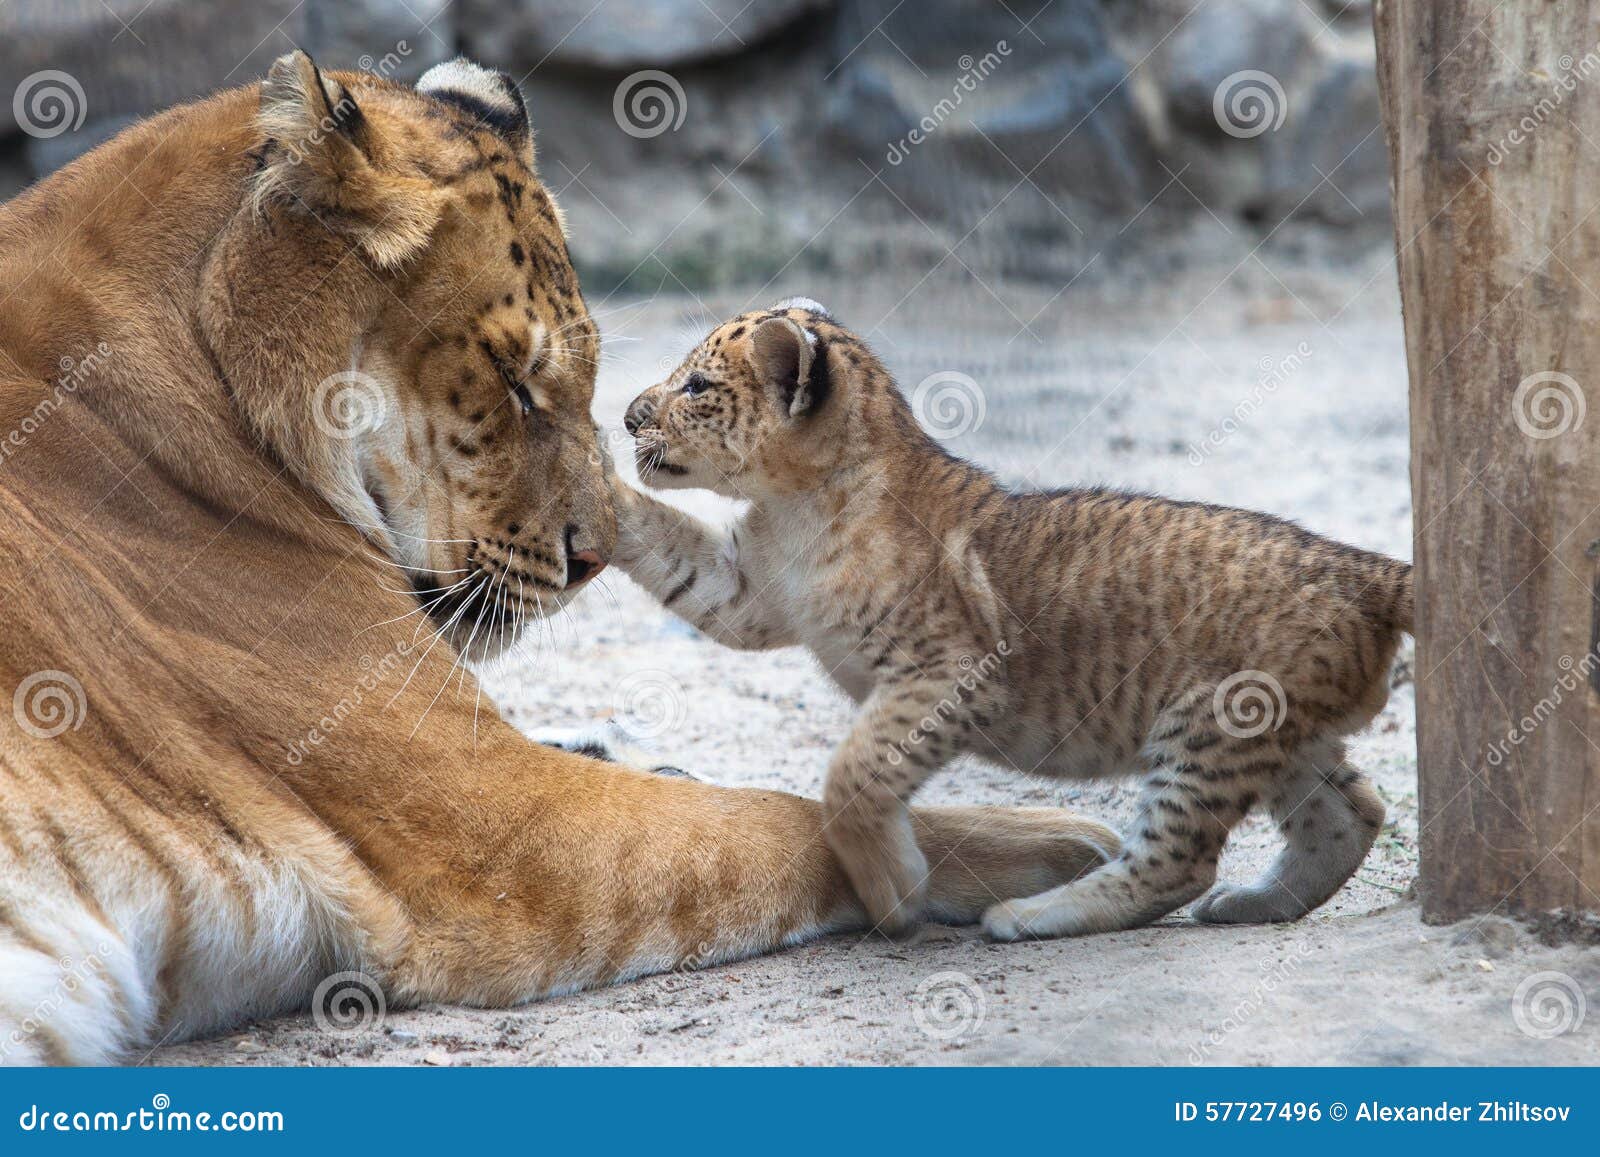 Liger stock photo. Image of face, lioness, female, playing - 57727496